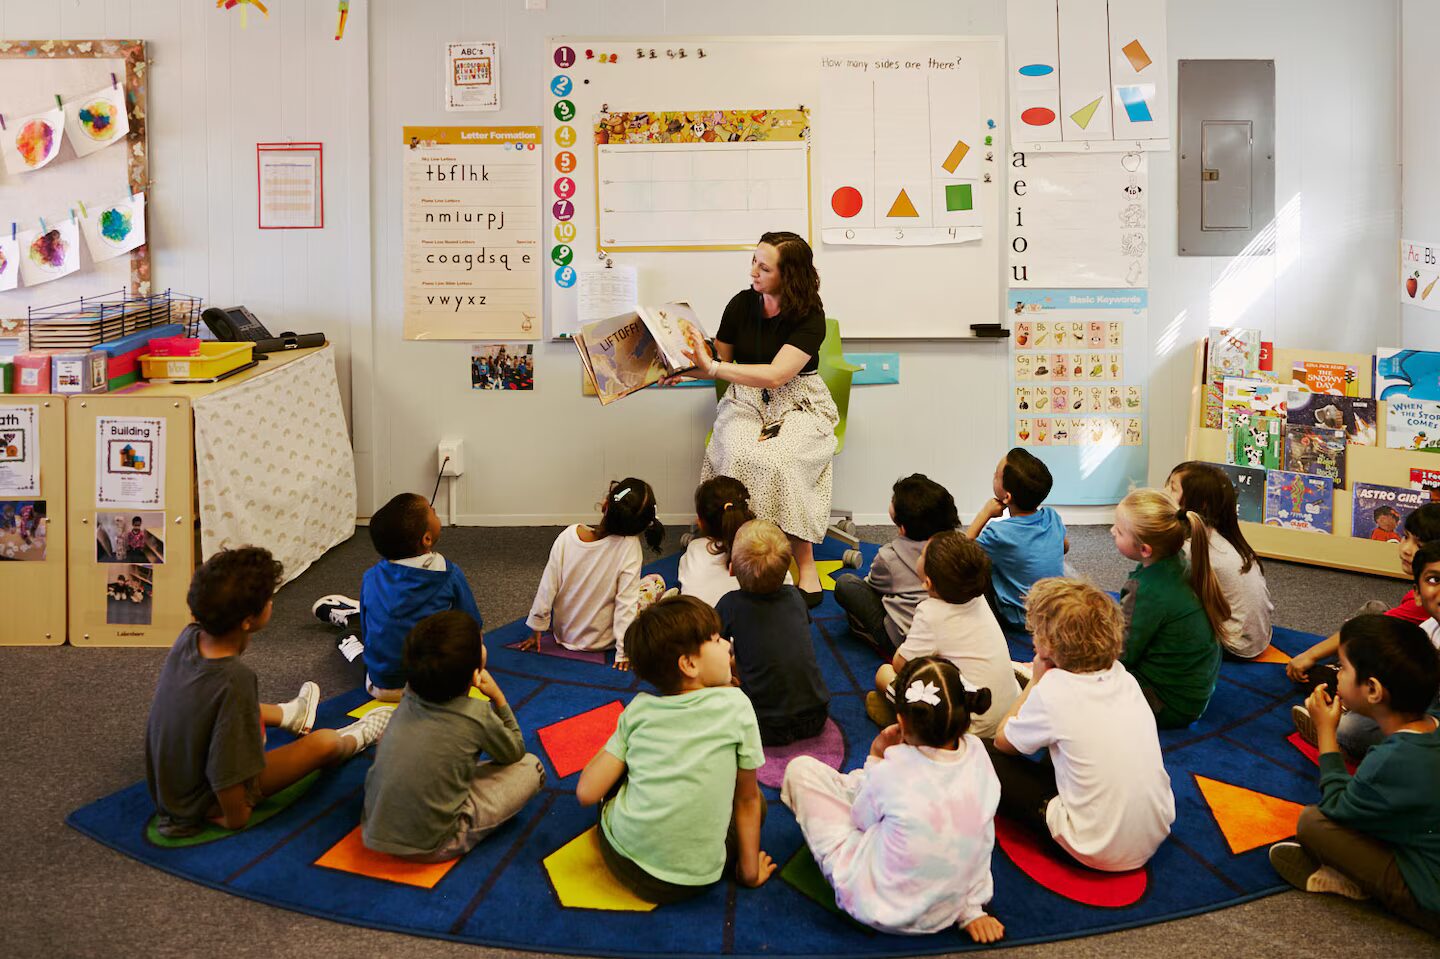 Colorado public preschool: Ten preschool children sit on colorful matts on floor of a classroom, in front of a seated, dark-haired, teacher reading a book to them and showing them the book's pictures